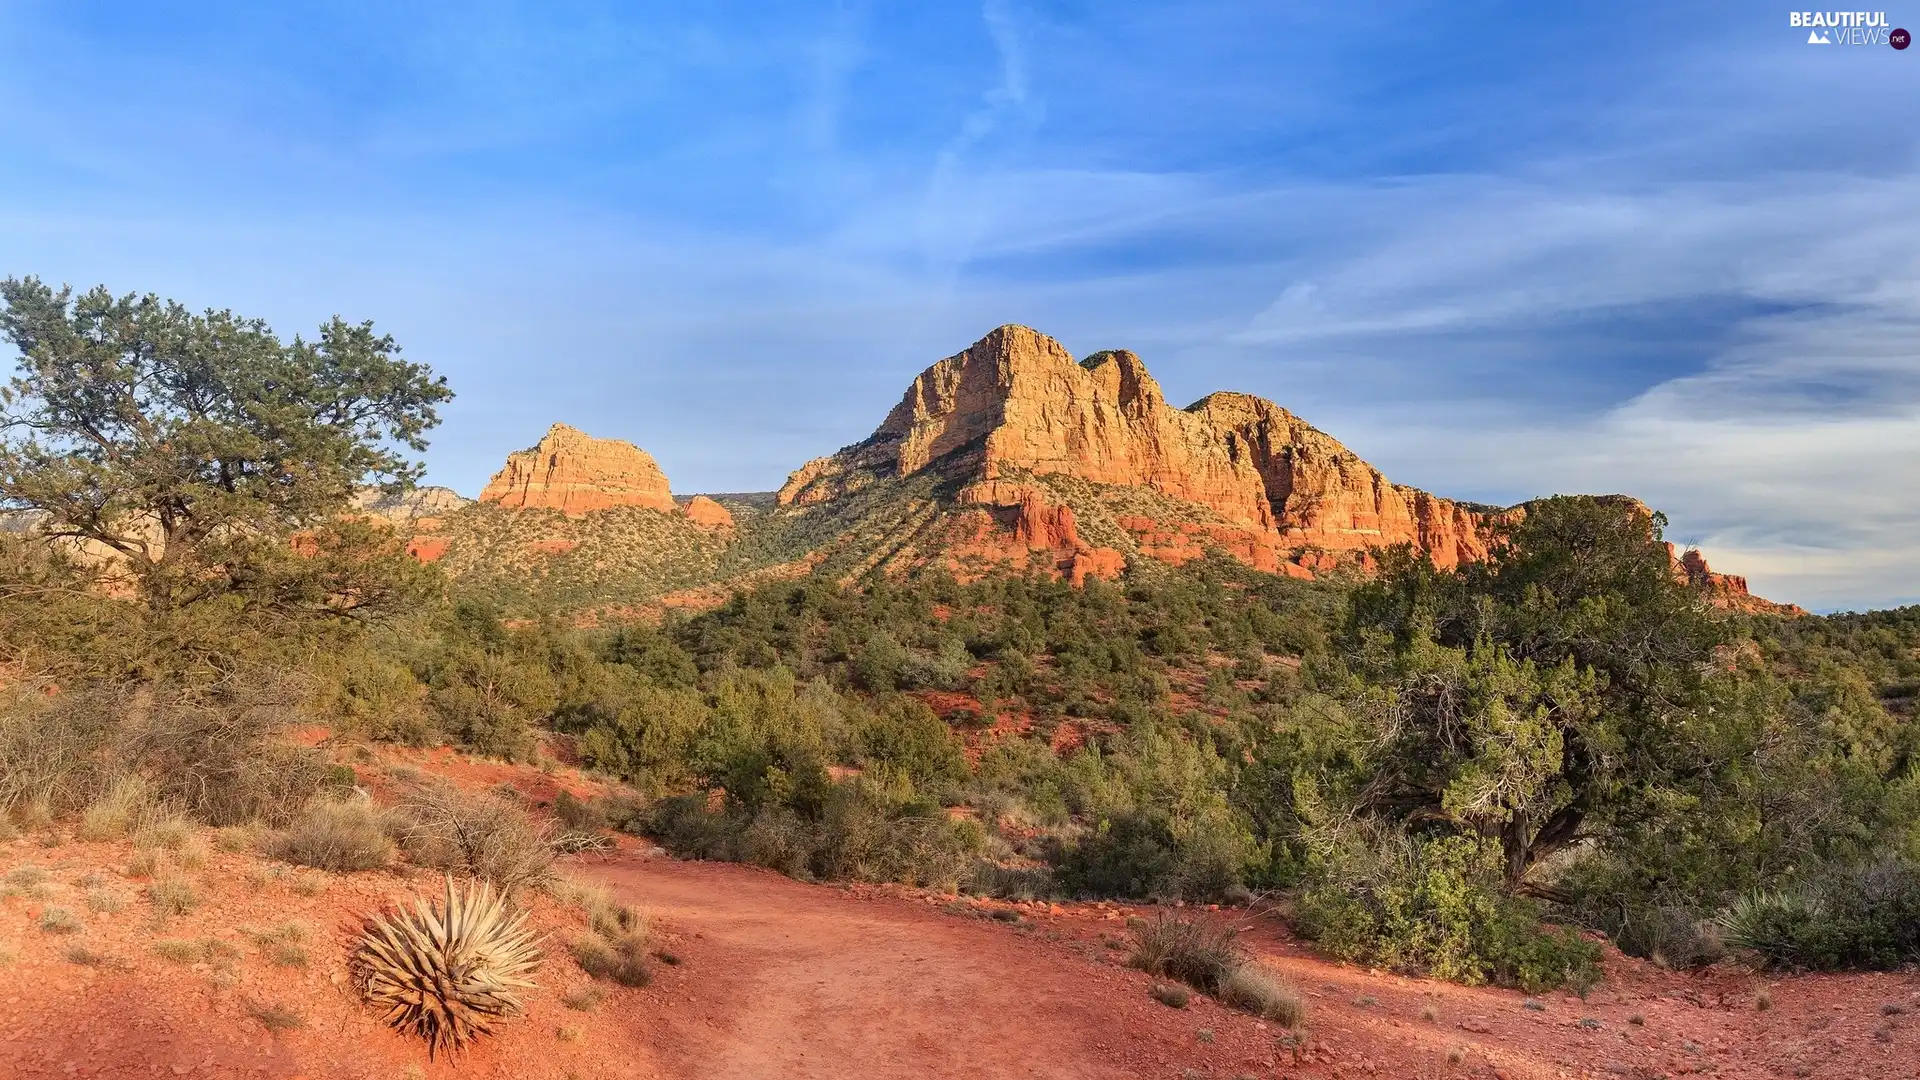 Red, State of Arizona, trees, Red Rock State Park, The United States, rocks, viewes